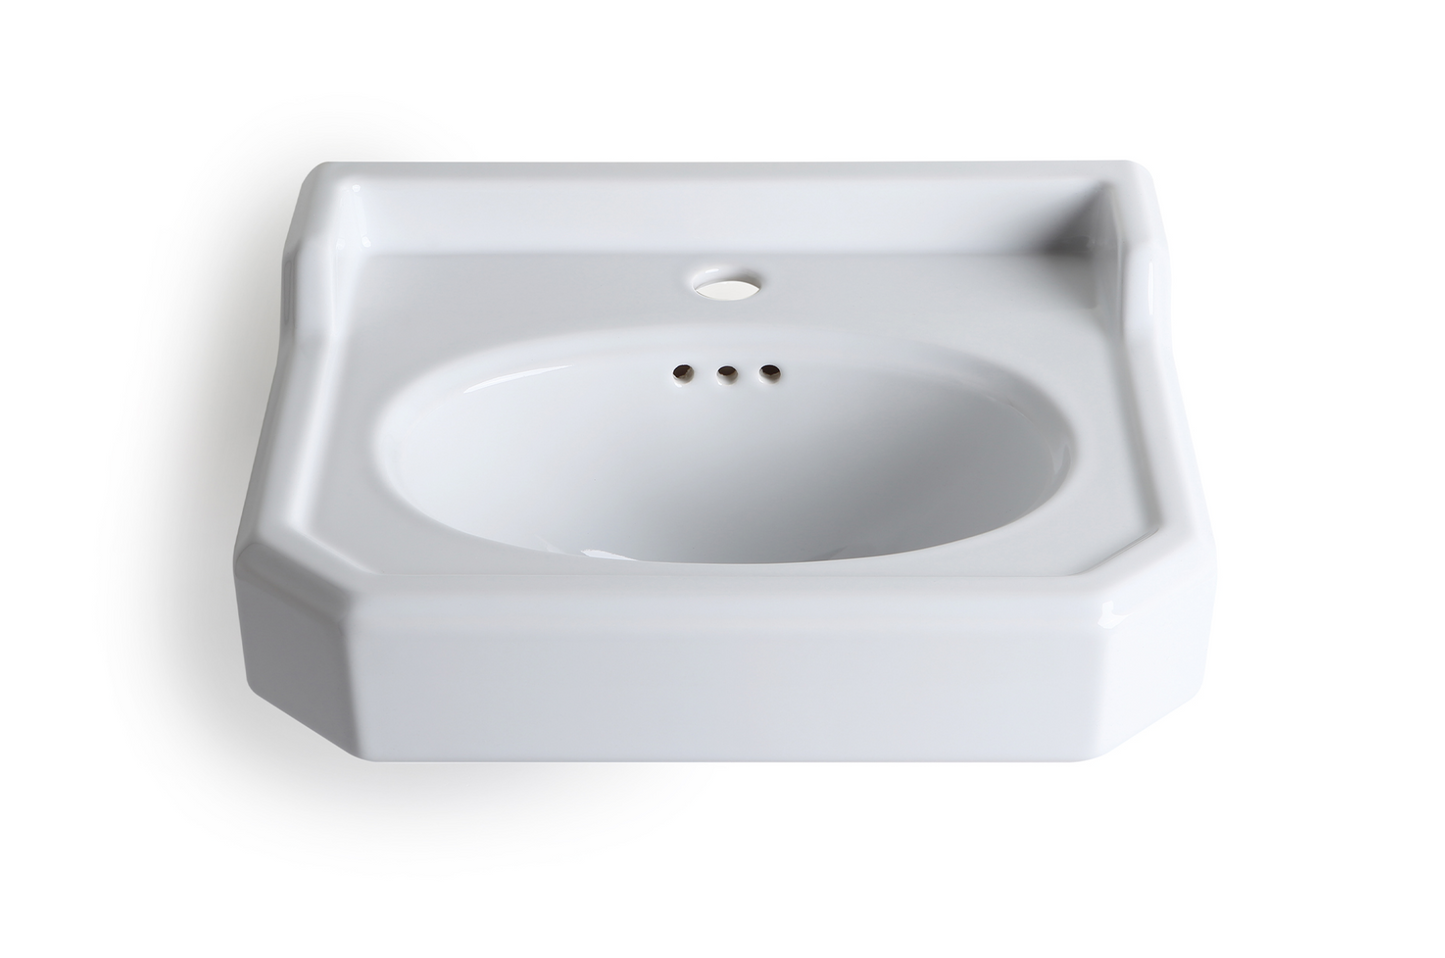 Provence 700 vanity size ceramic sink by Balneo Toscia Classic style